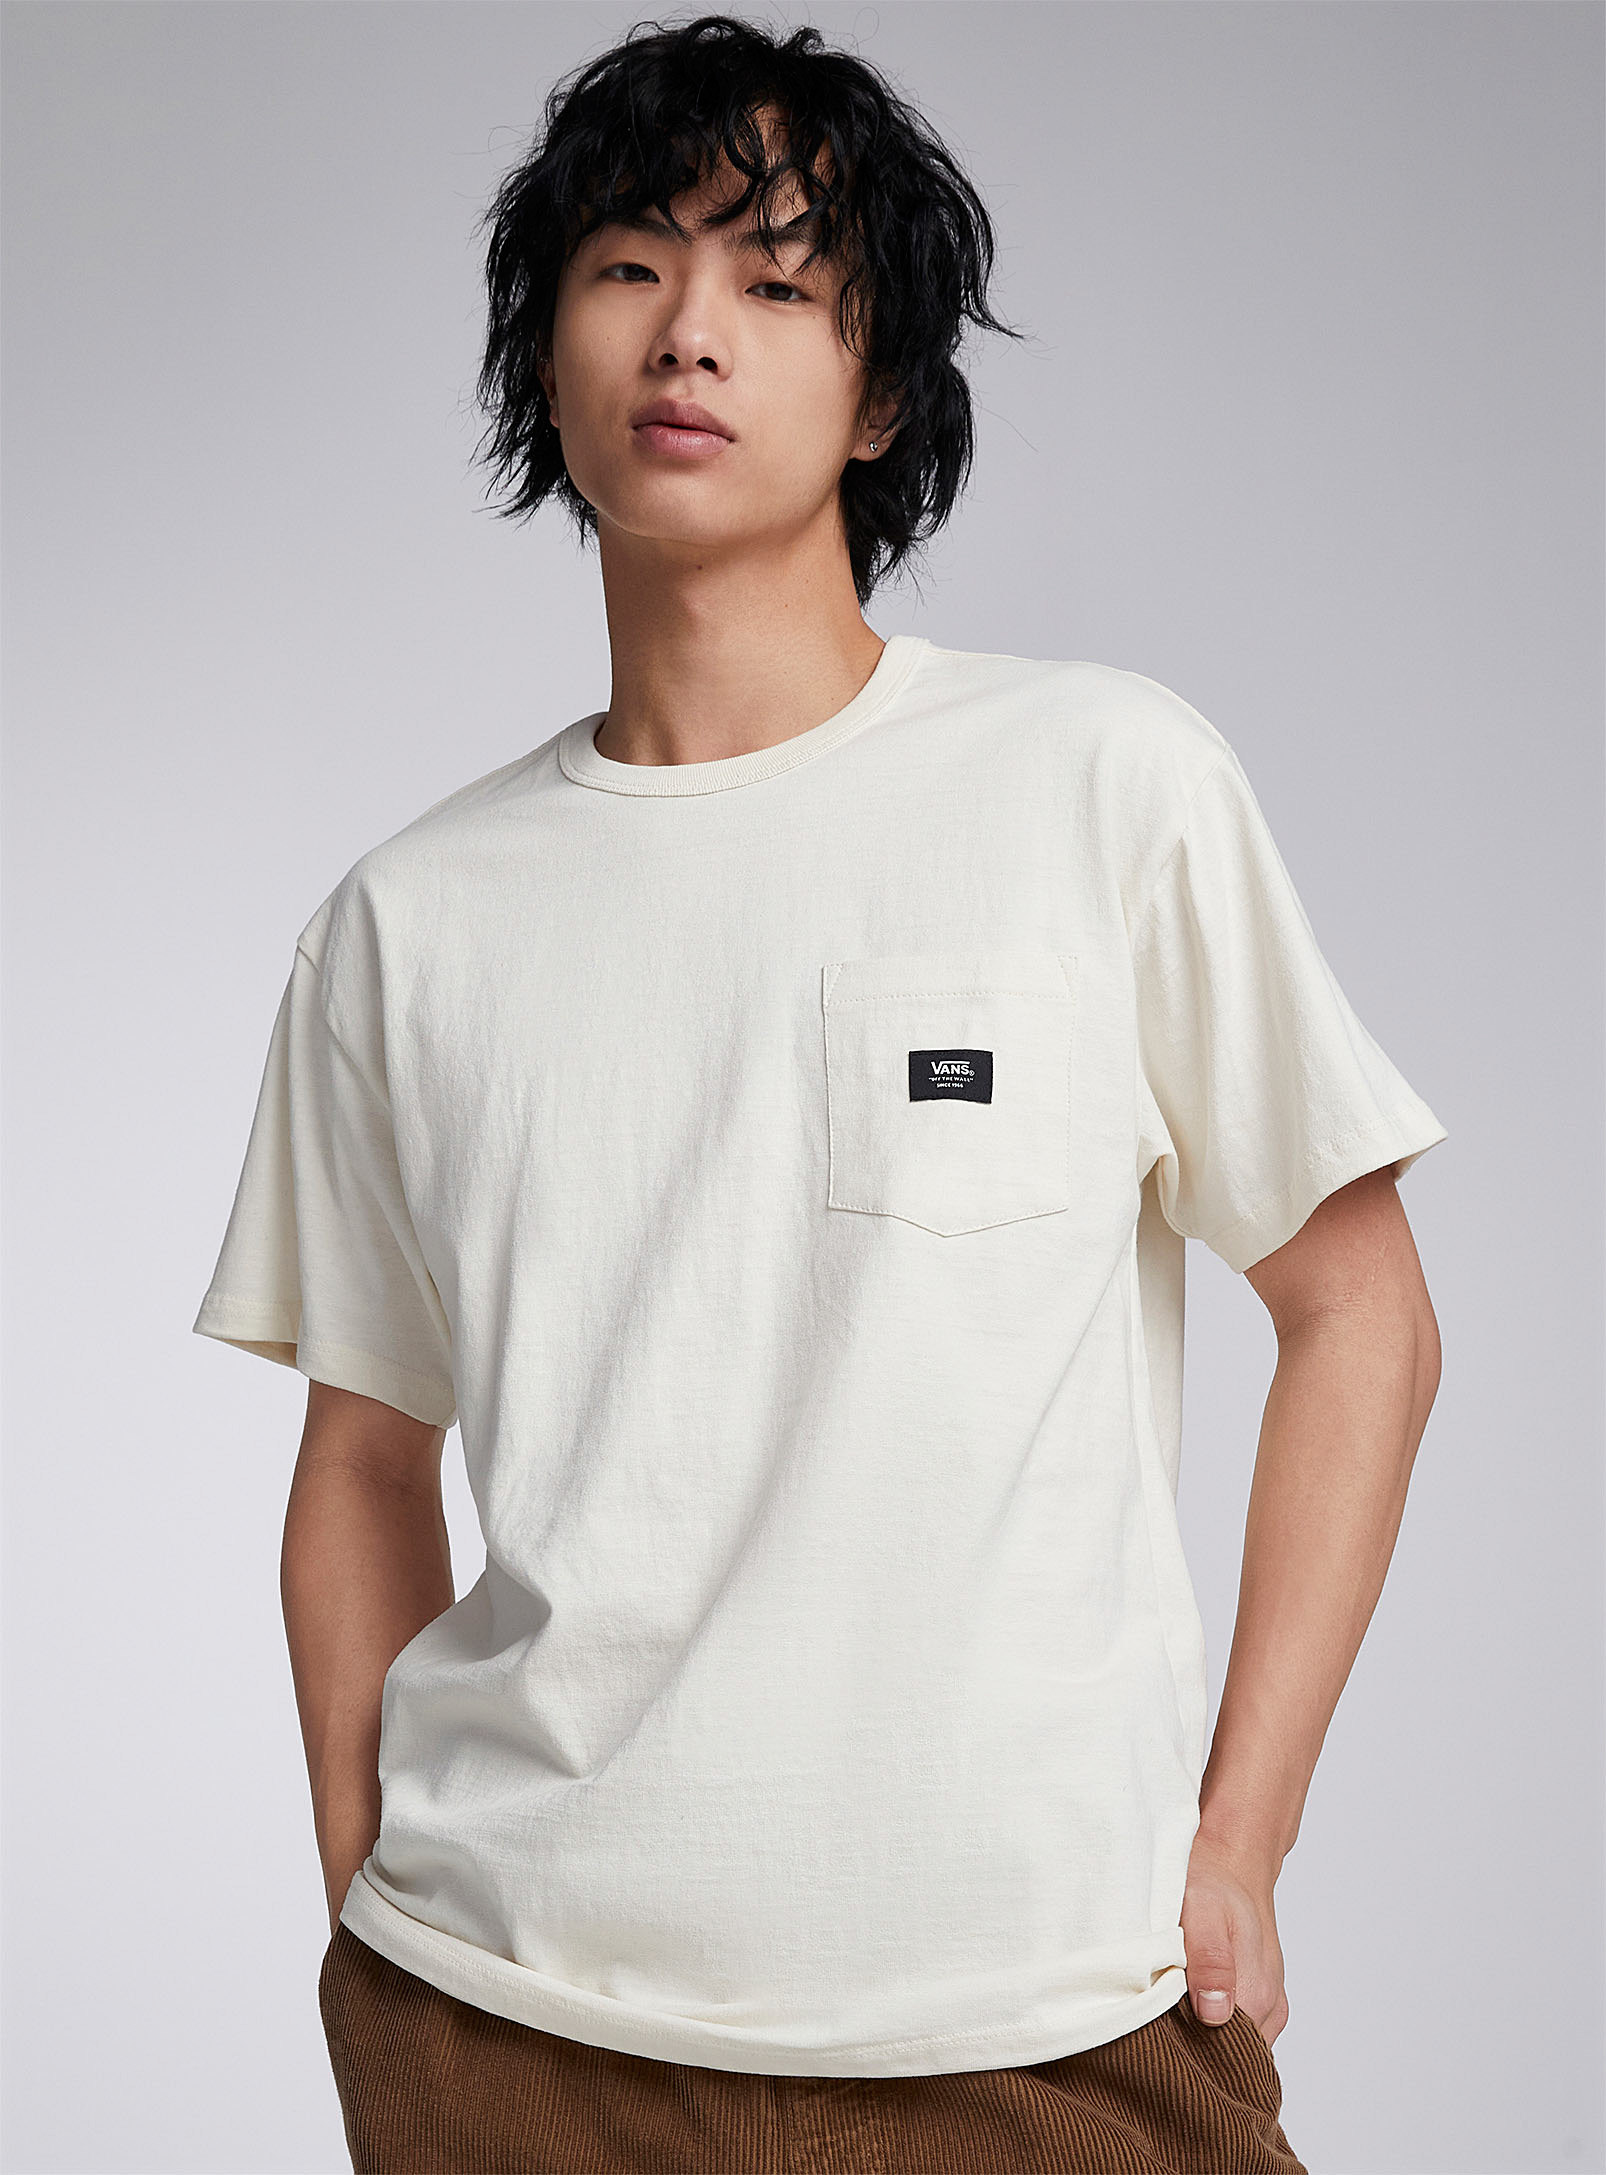 Vans Woven Patch Pocket T-shirt In White